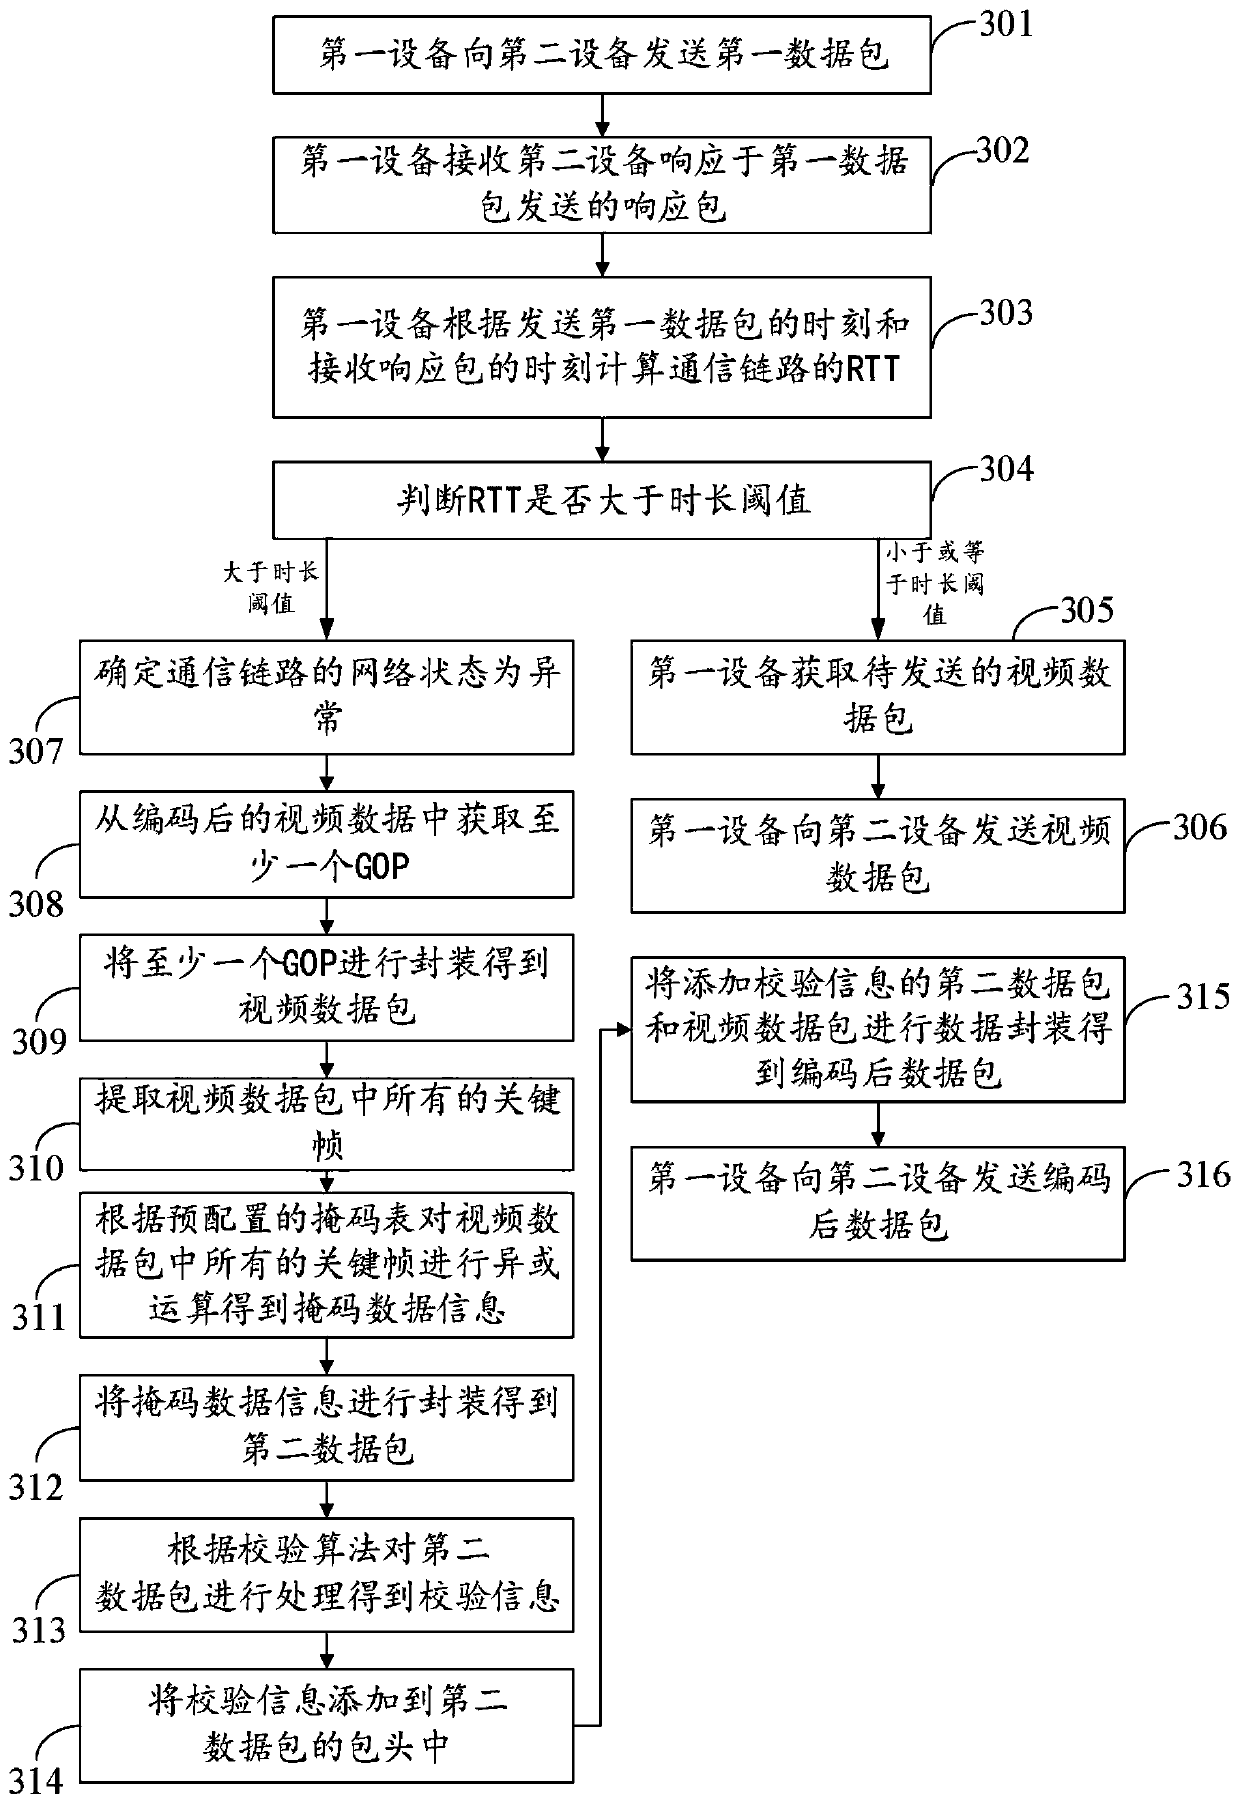 Video data transmission method and device, electronic equipment and storage medium